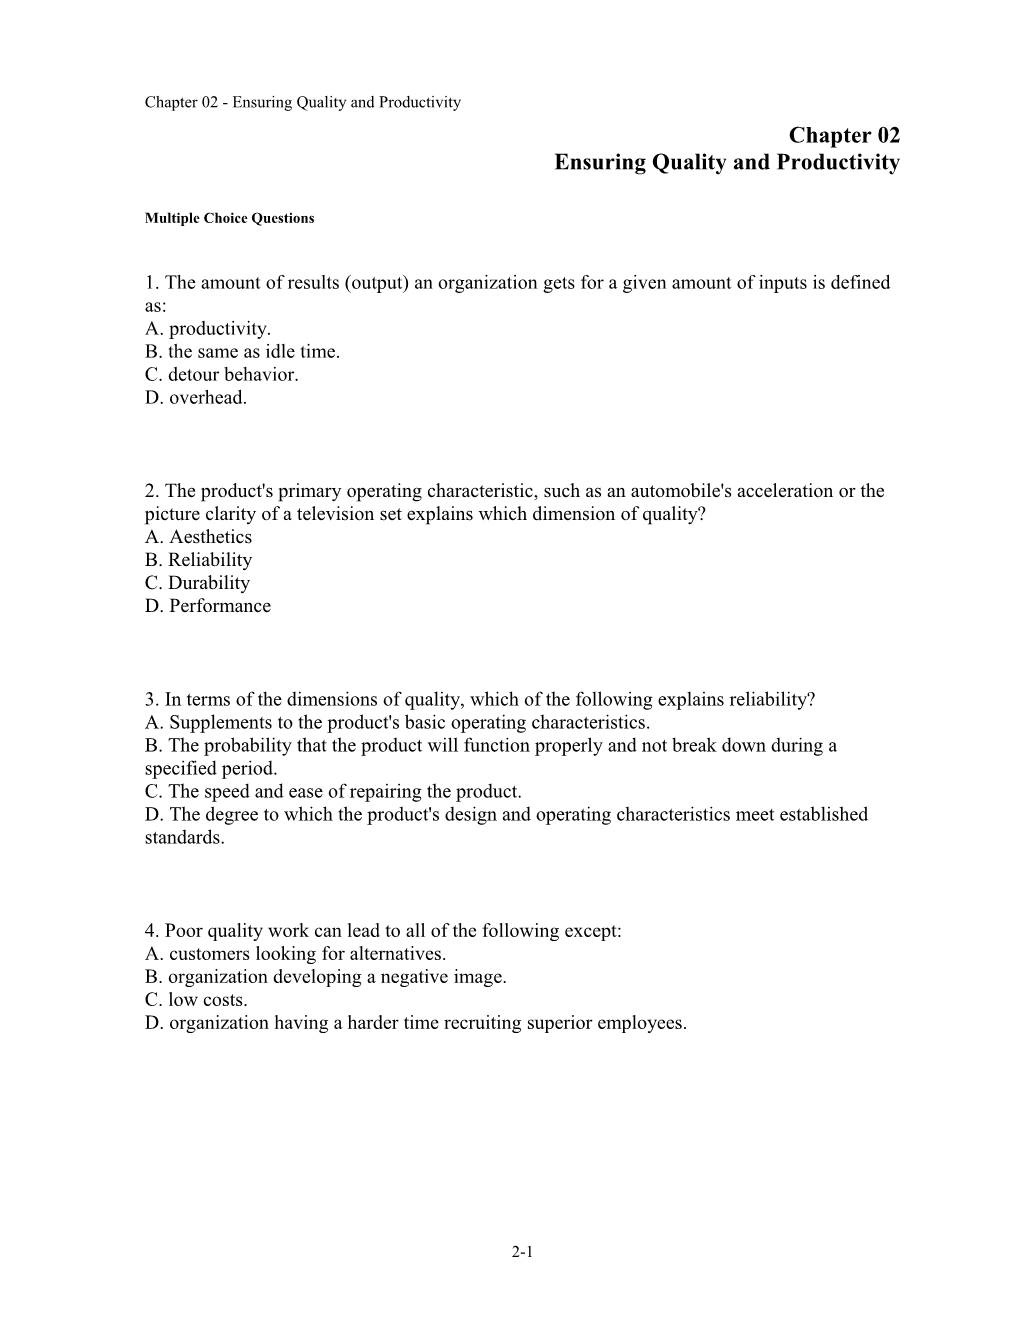 Chapter 02 Ensuring Quality and Productivity